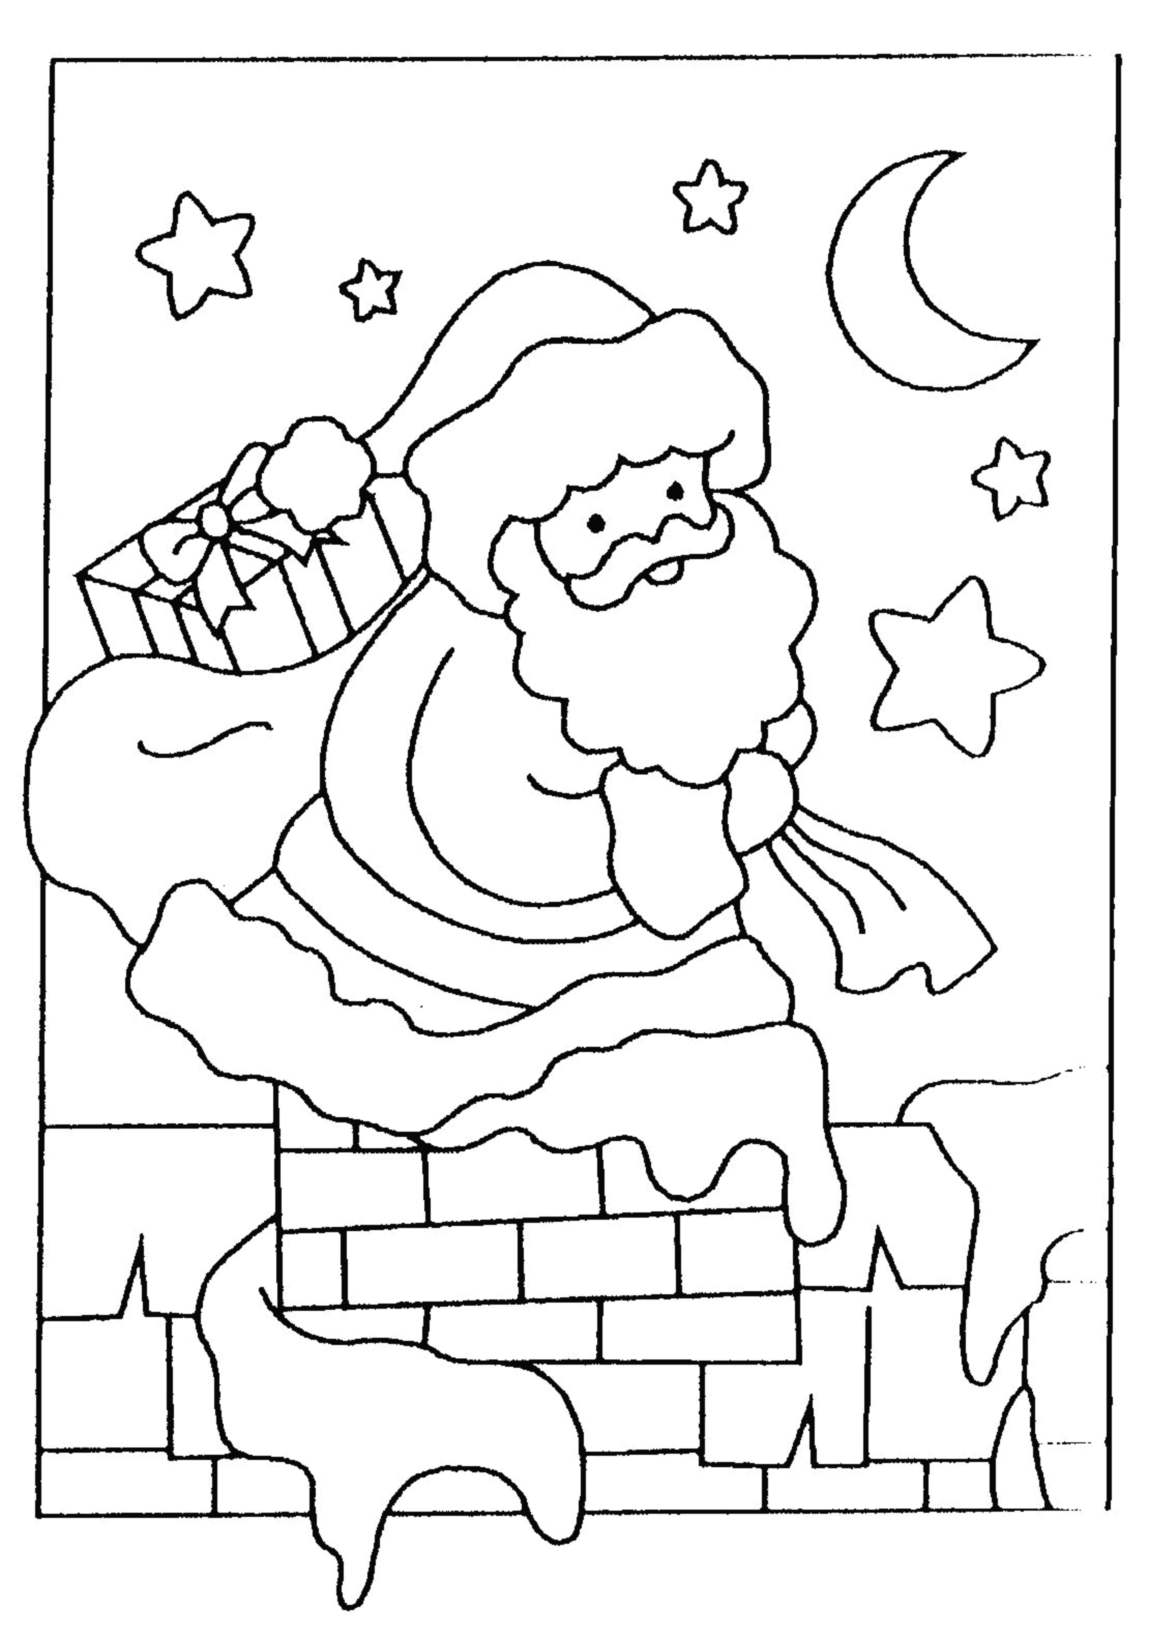 Download Santa claus to download - Santa Claus Kids Coloring Pages